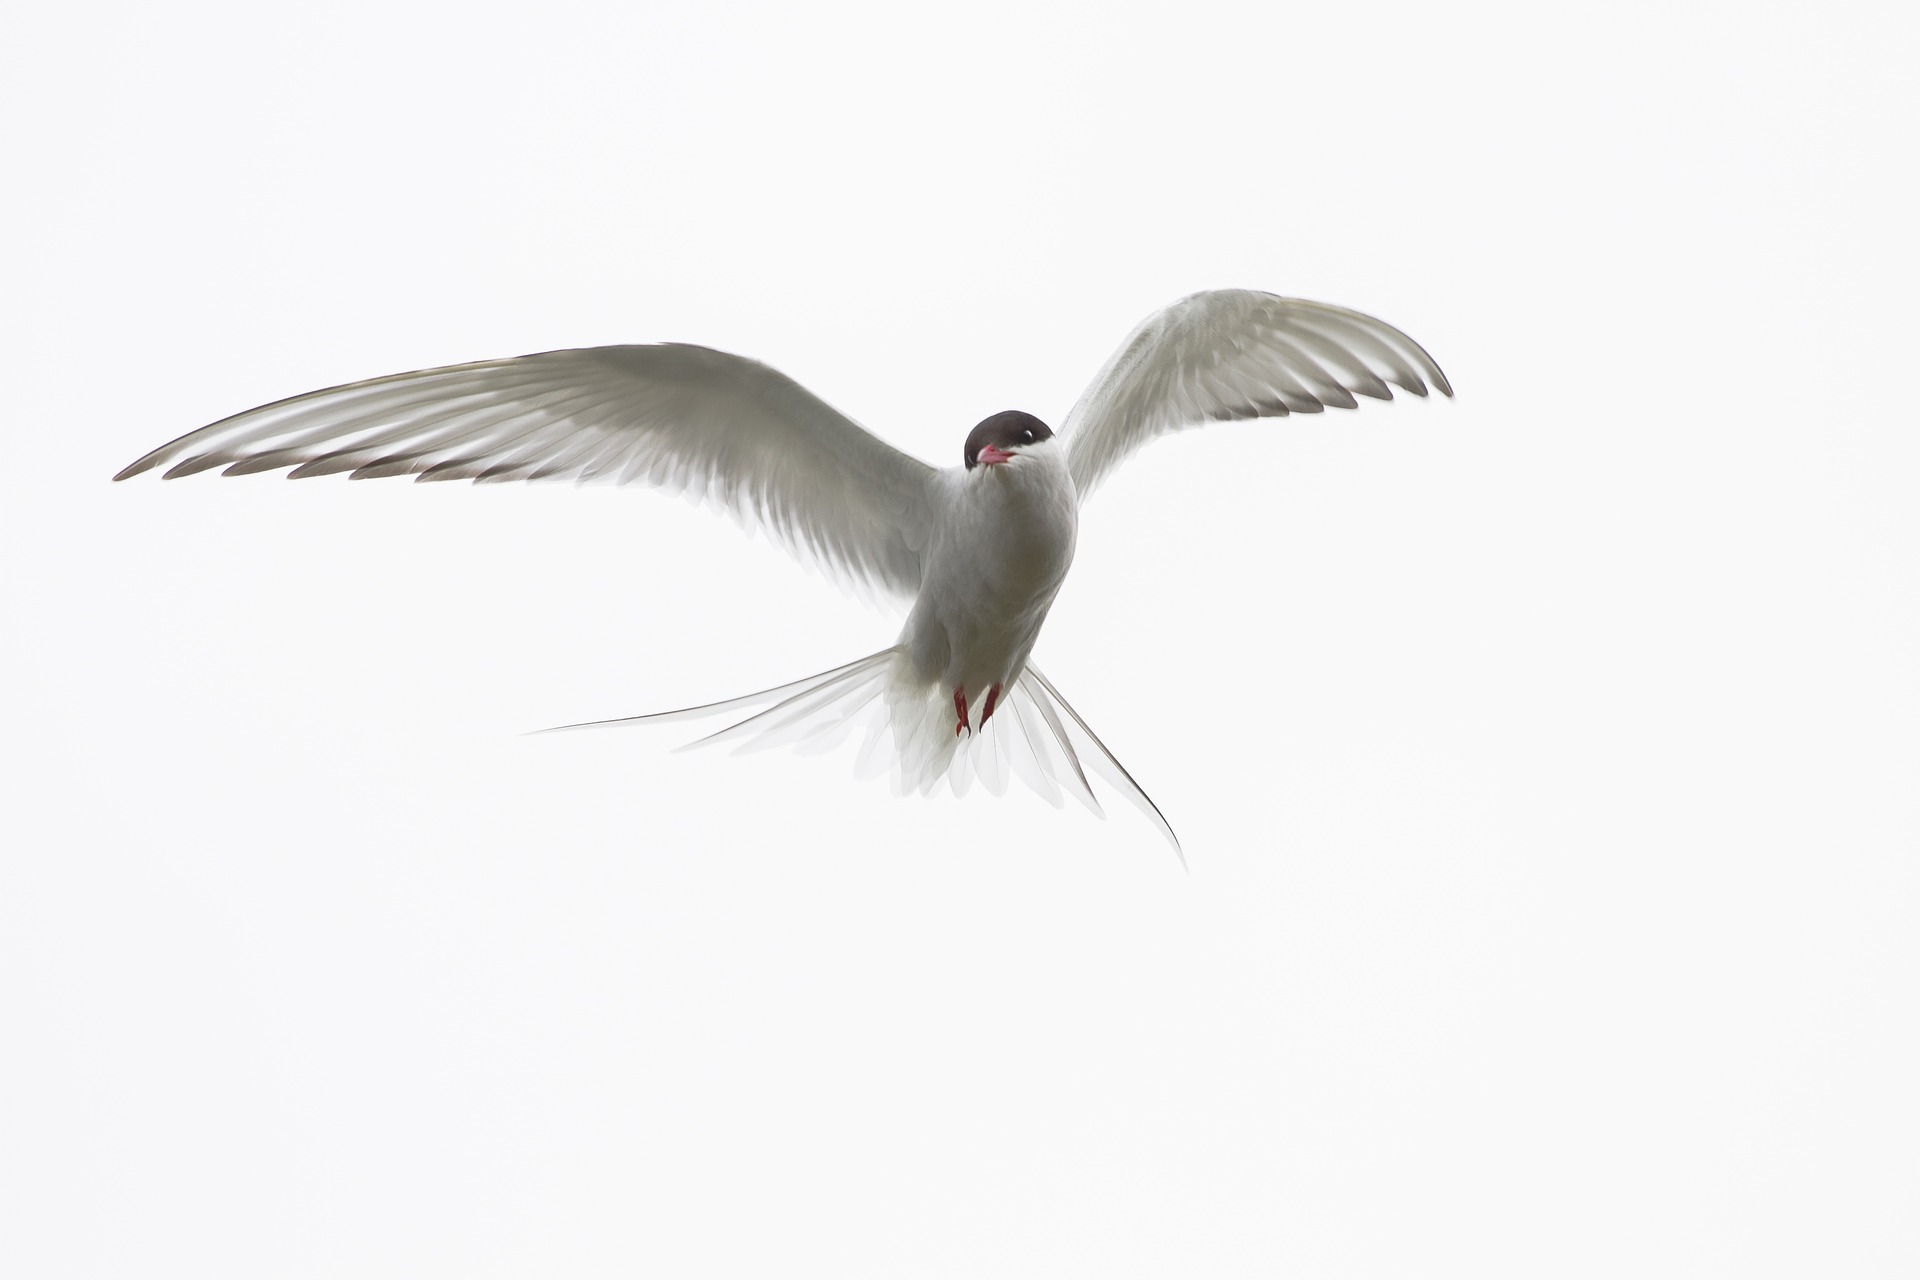 Arctic Tern with Outstretched Wings